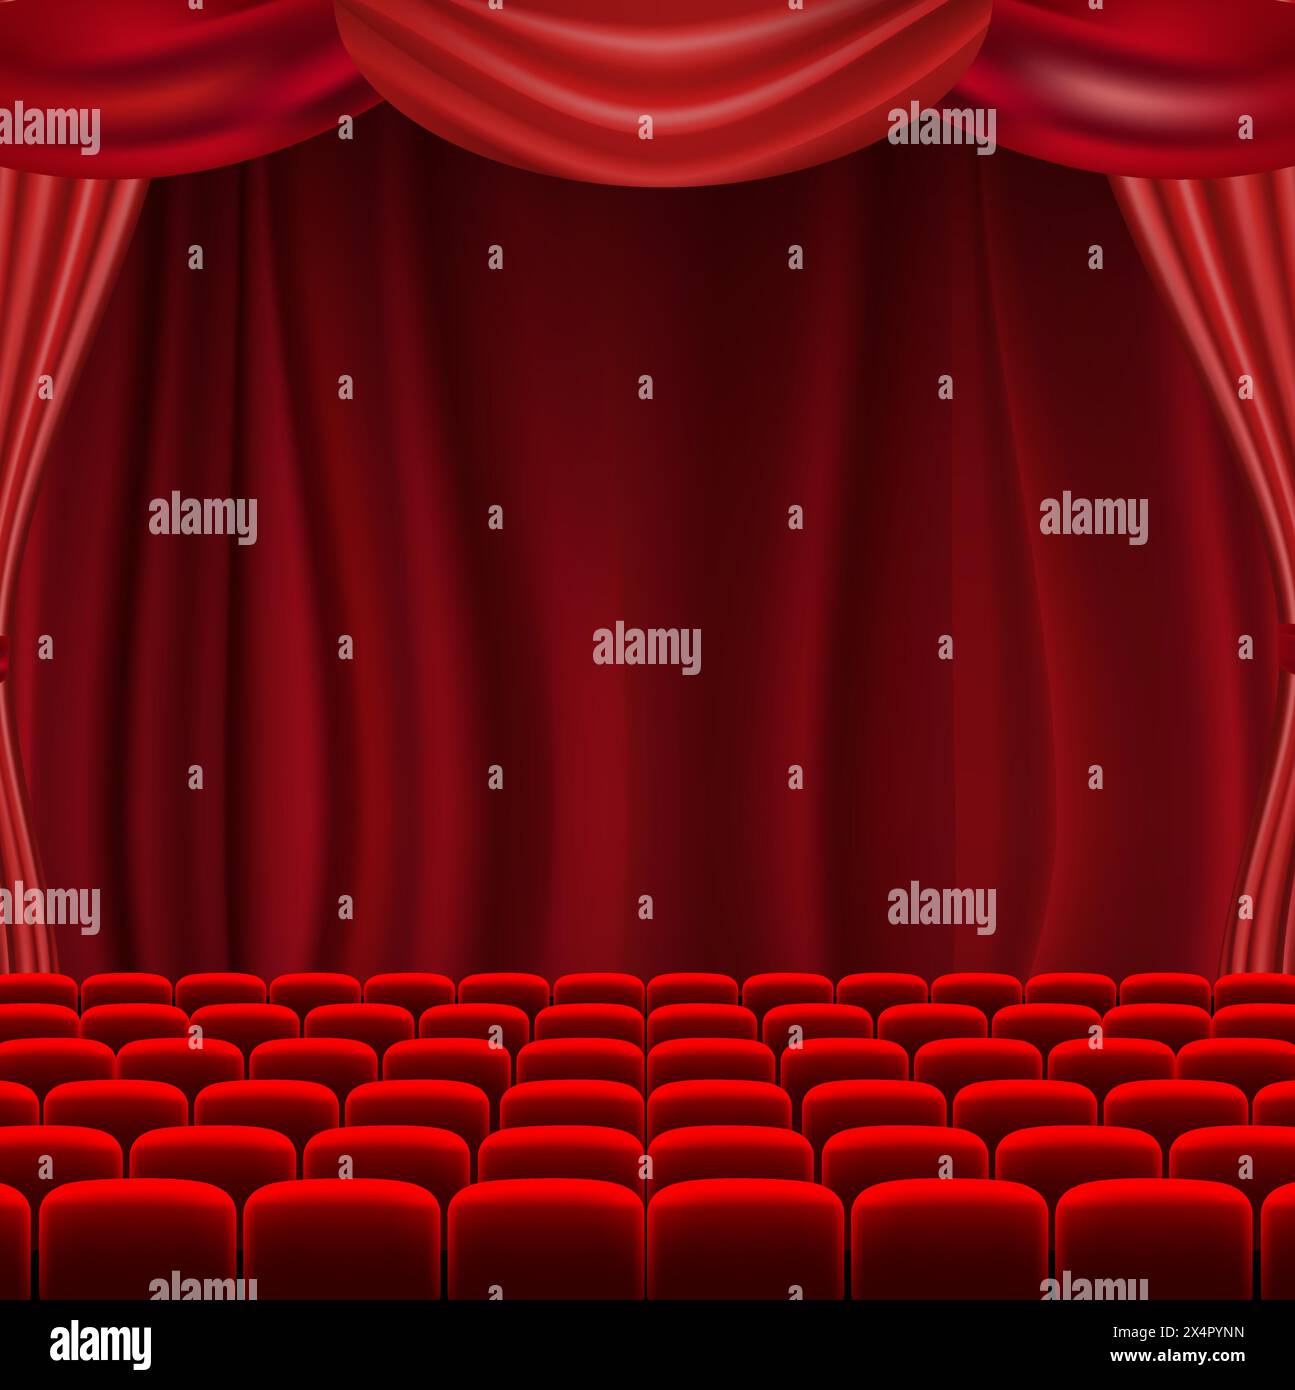 Cinema Screen With Curtains With Gradient Mesh, Vector Illustration Stock Vector